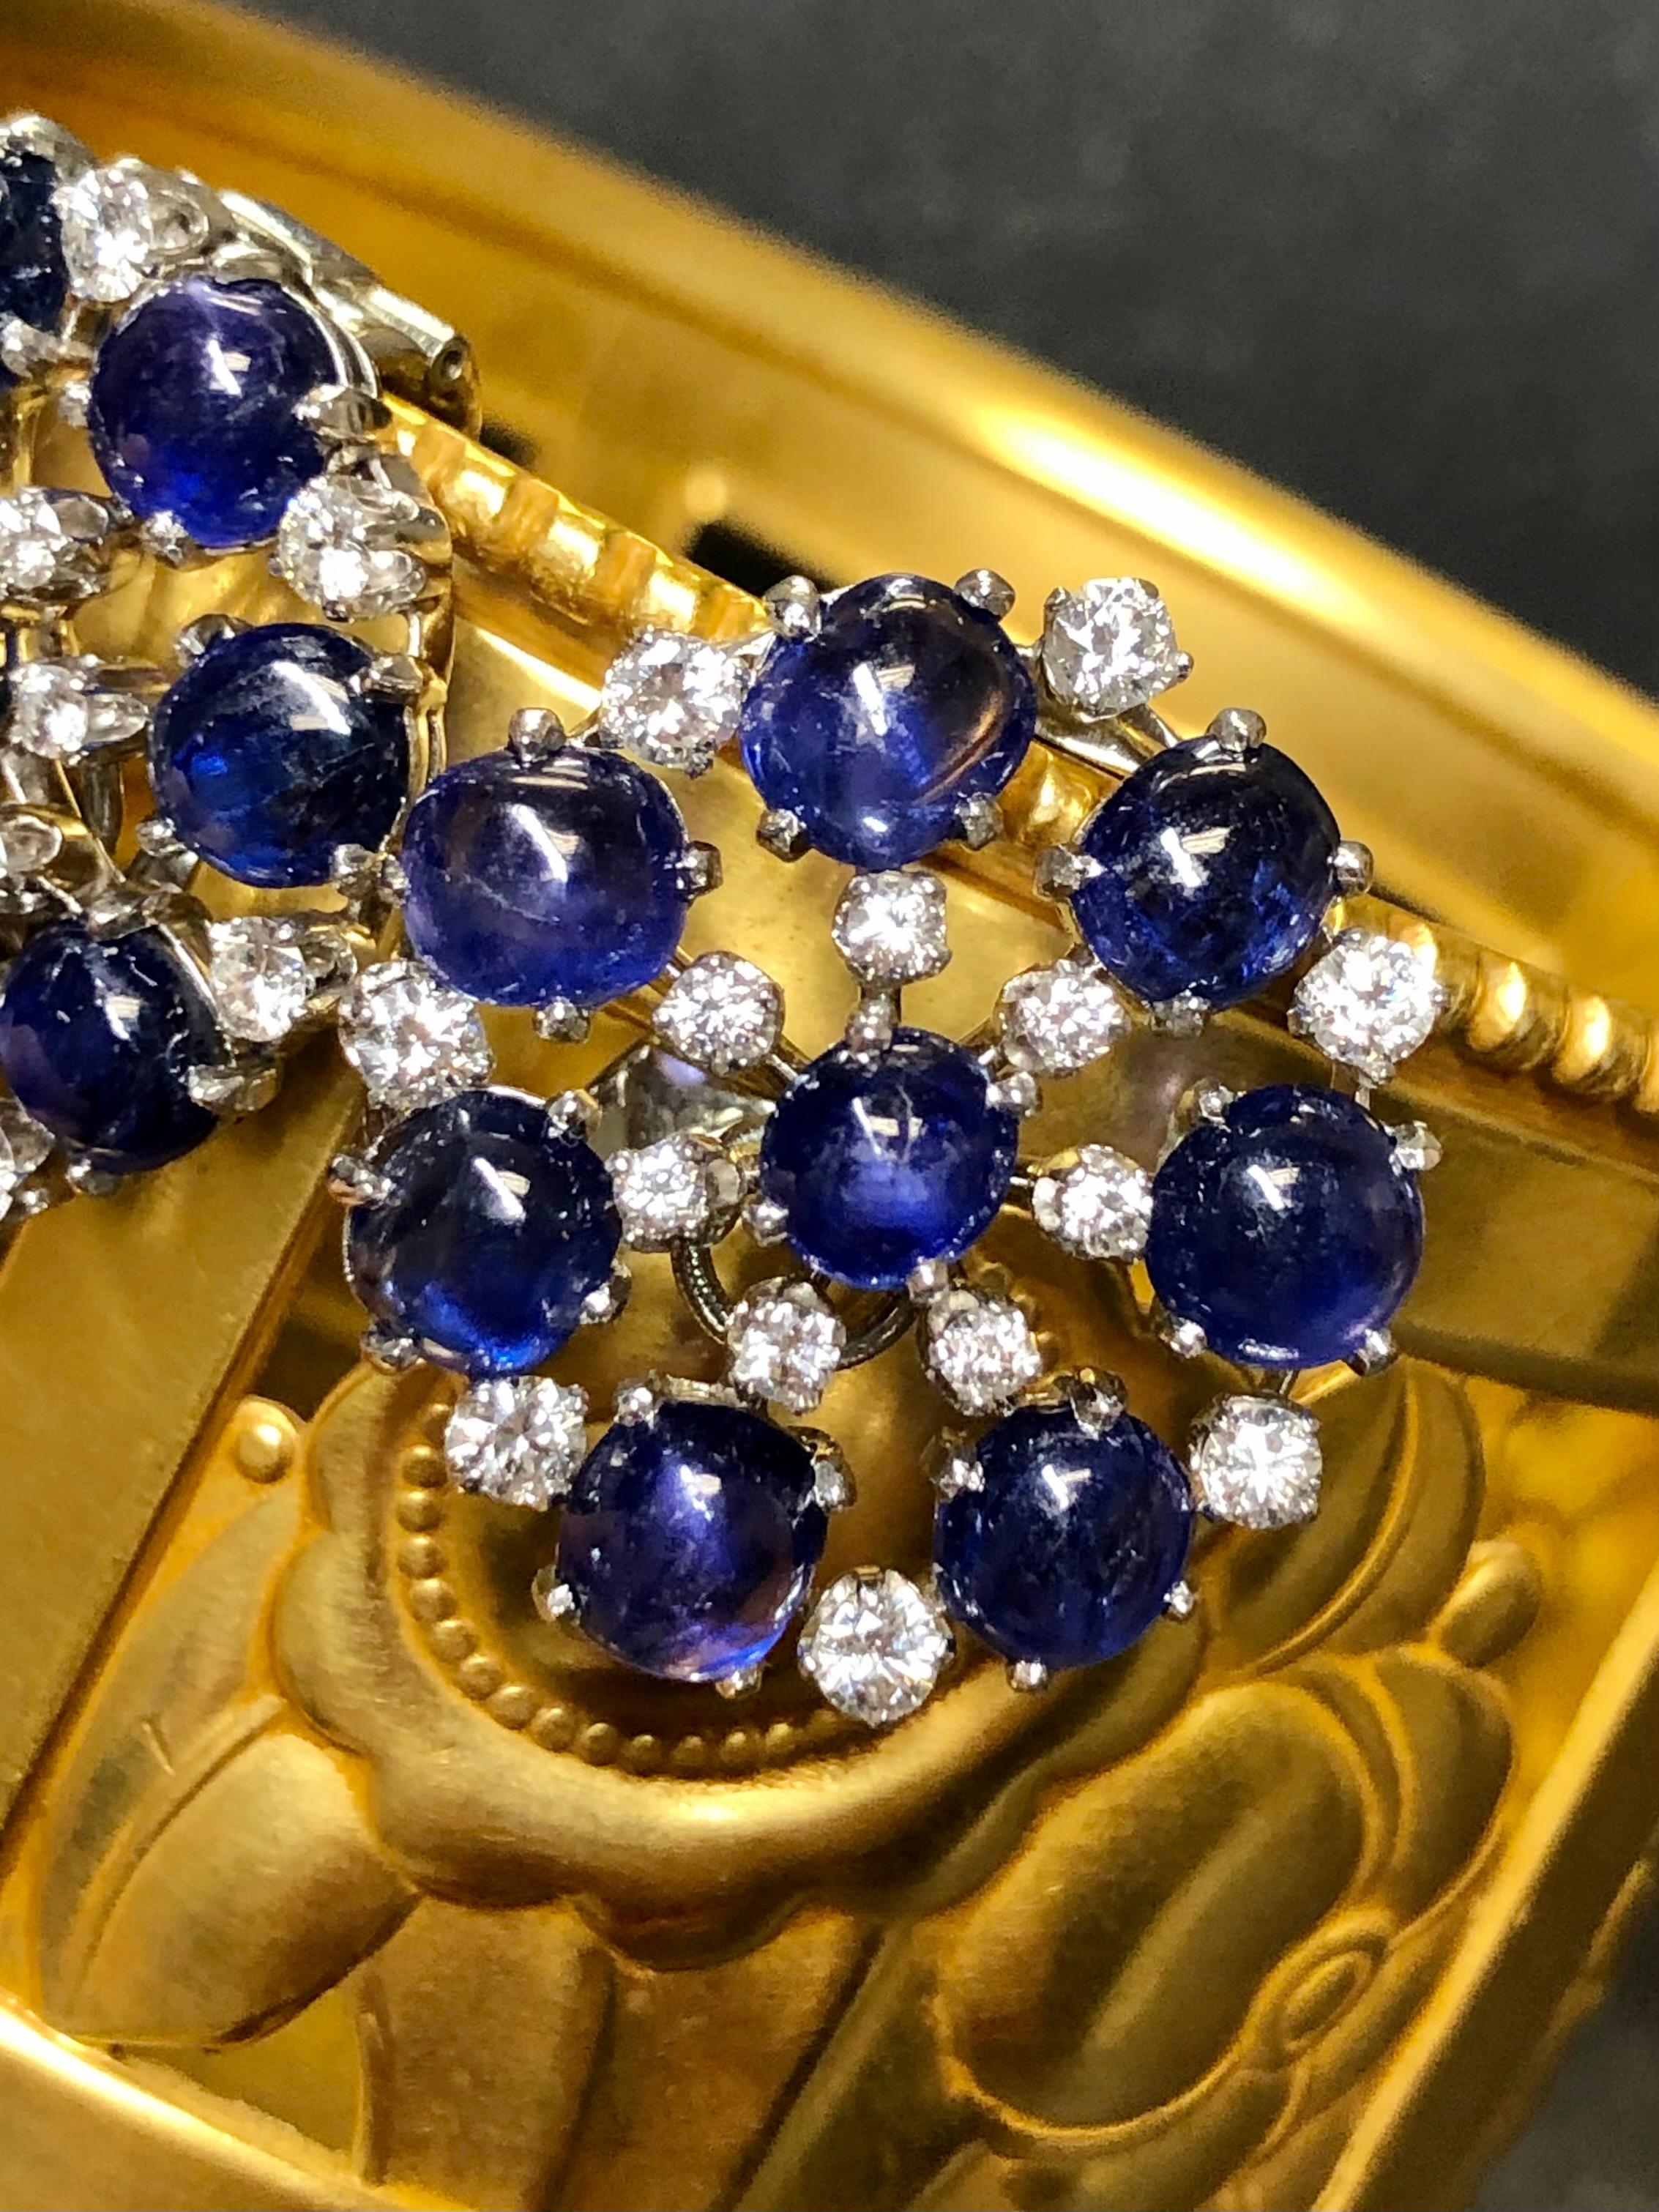 Gorgeous vintage earrings c. the 1950’s done in platinum (14K backs as tested) set with approximately 16cttw in natural

Cabochon sapphires averaging 1ct each. Separating the sapphire is approximately 1.80cttw in larger G-H color Vs diamonds. The